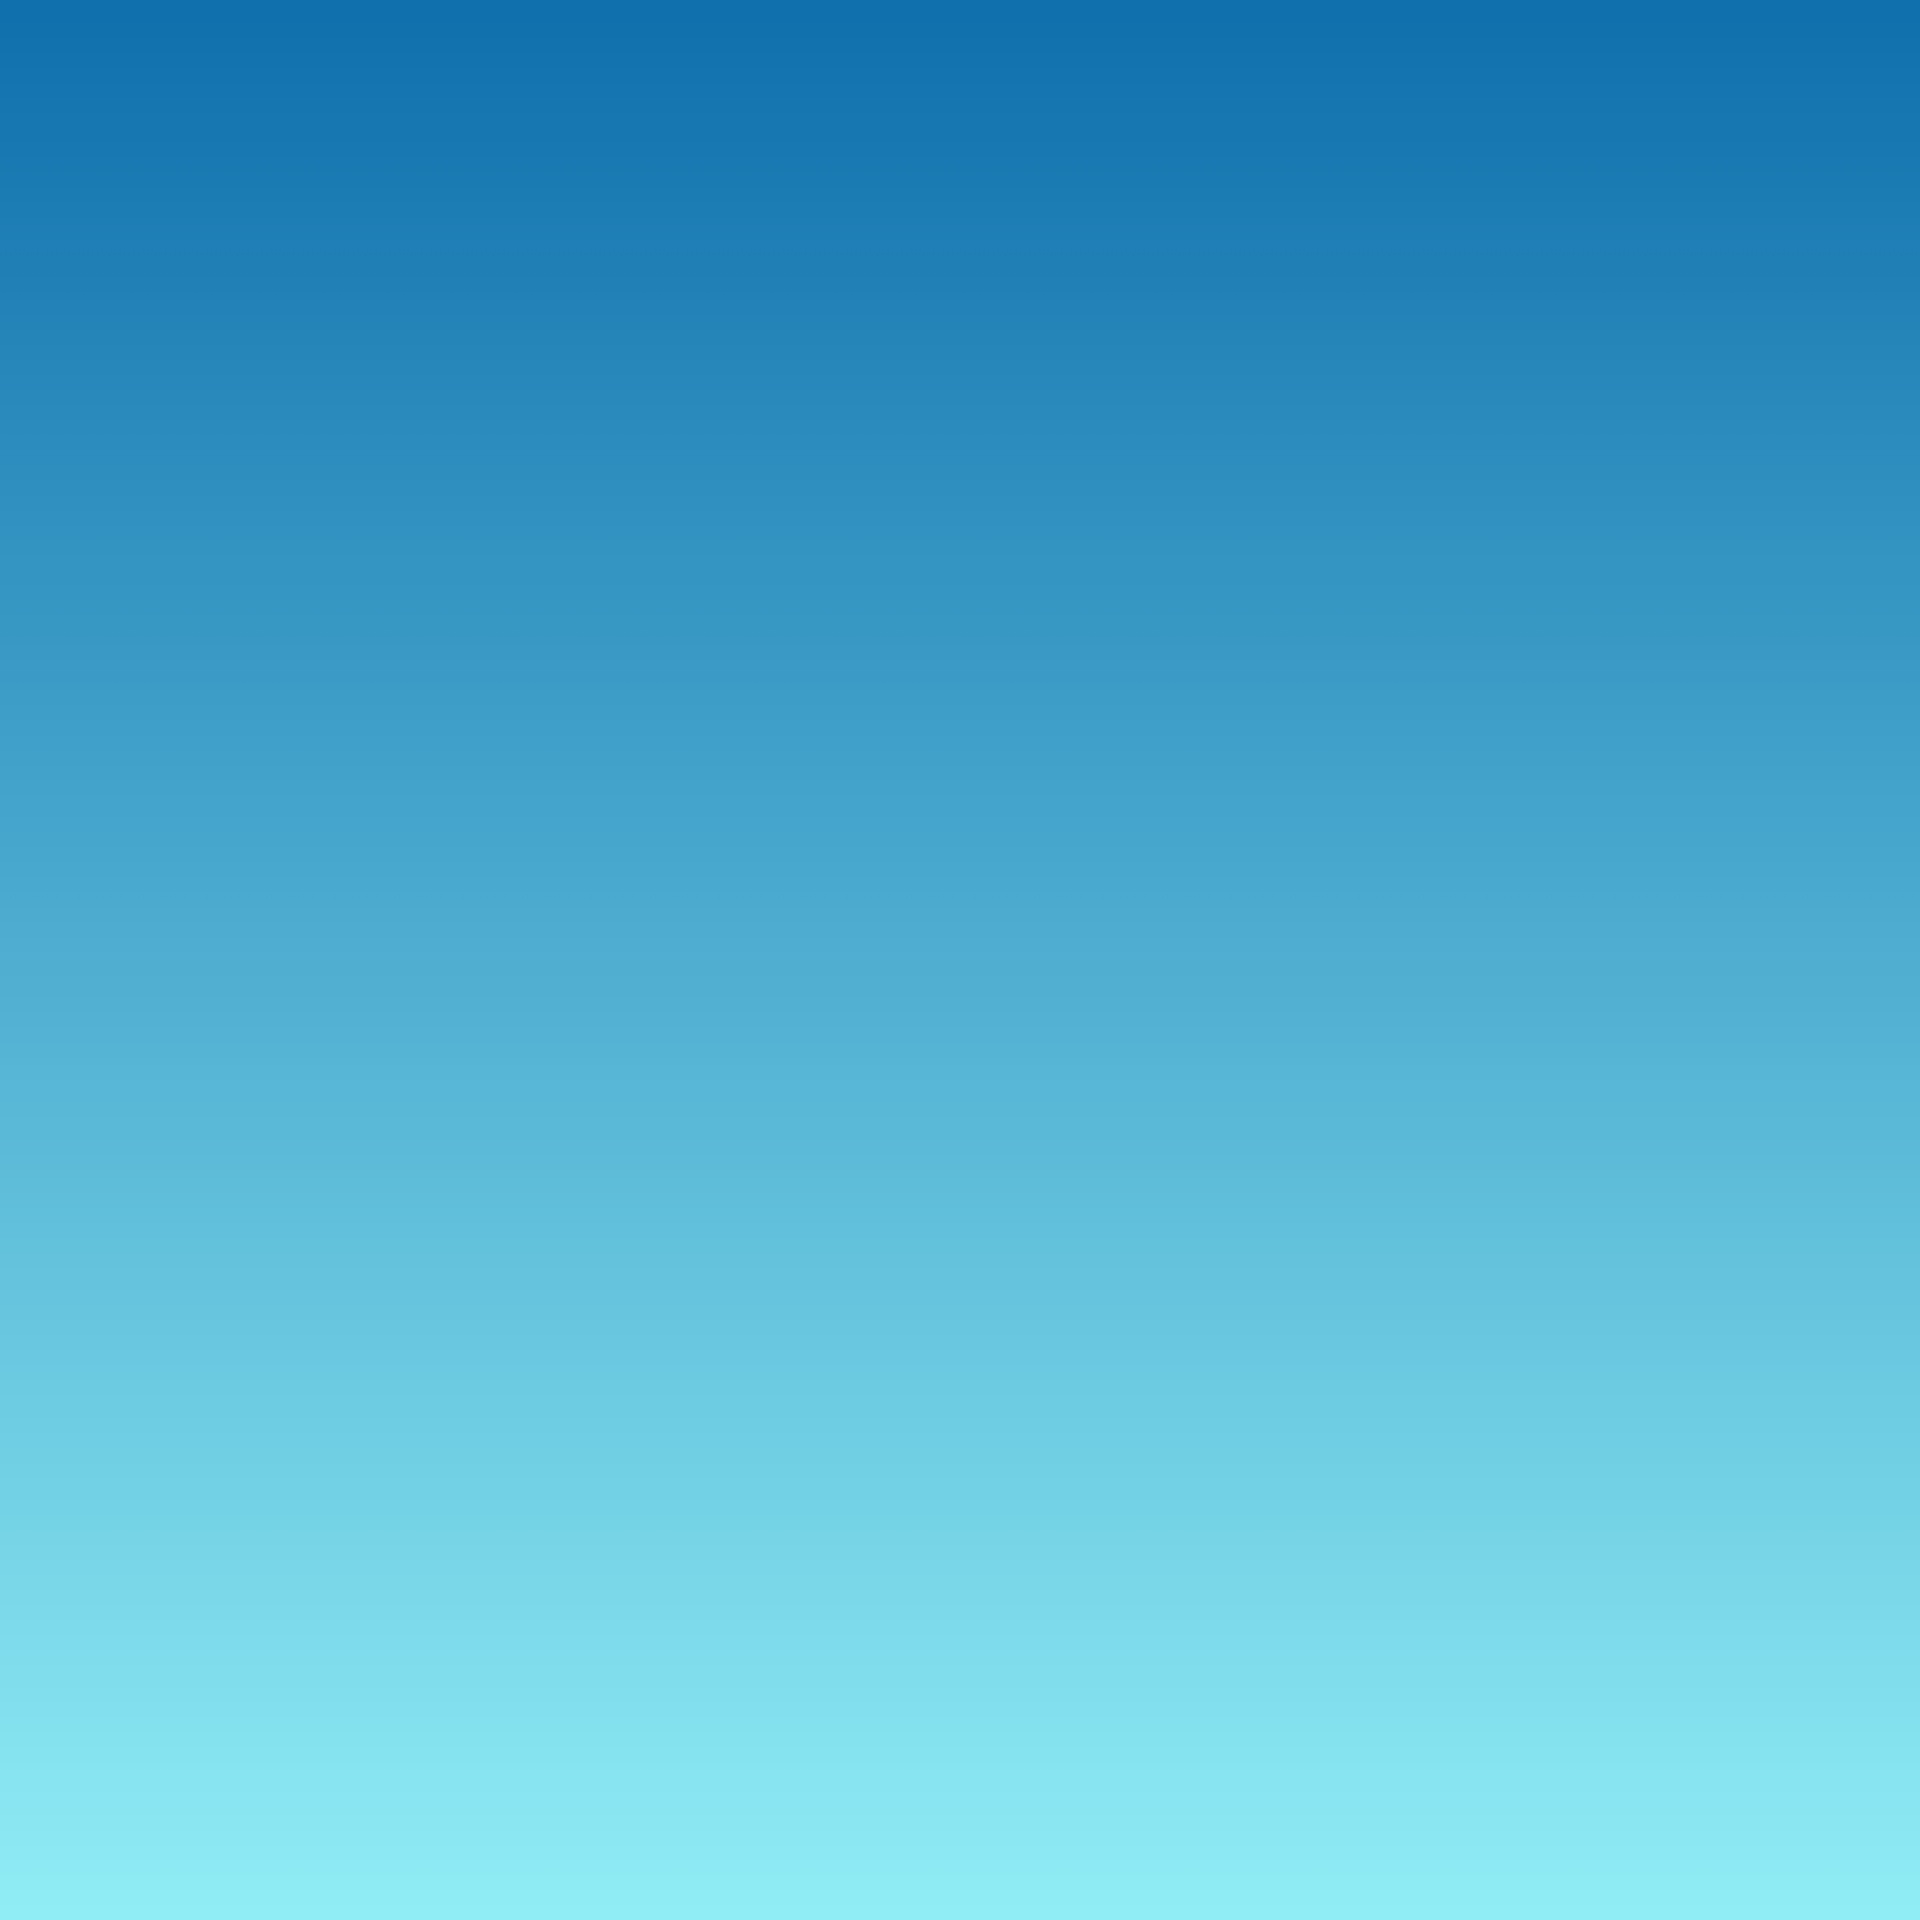 Download free photo of Gradient,blue,background,wallpaper,square - from  